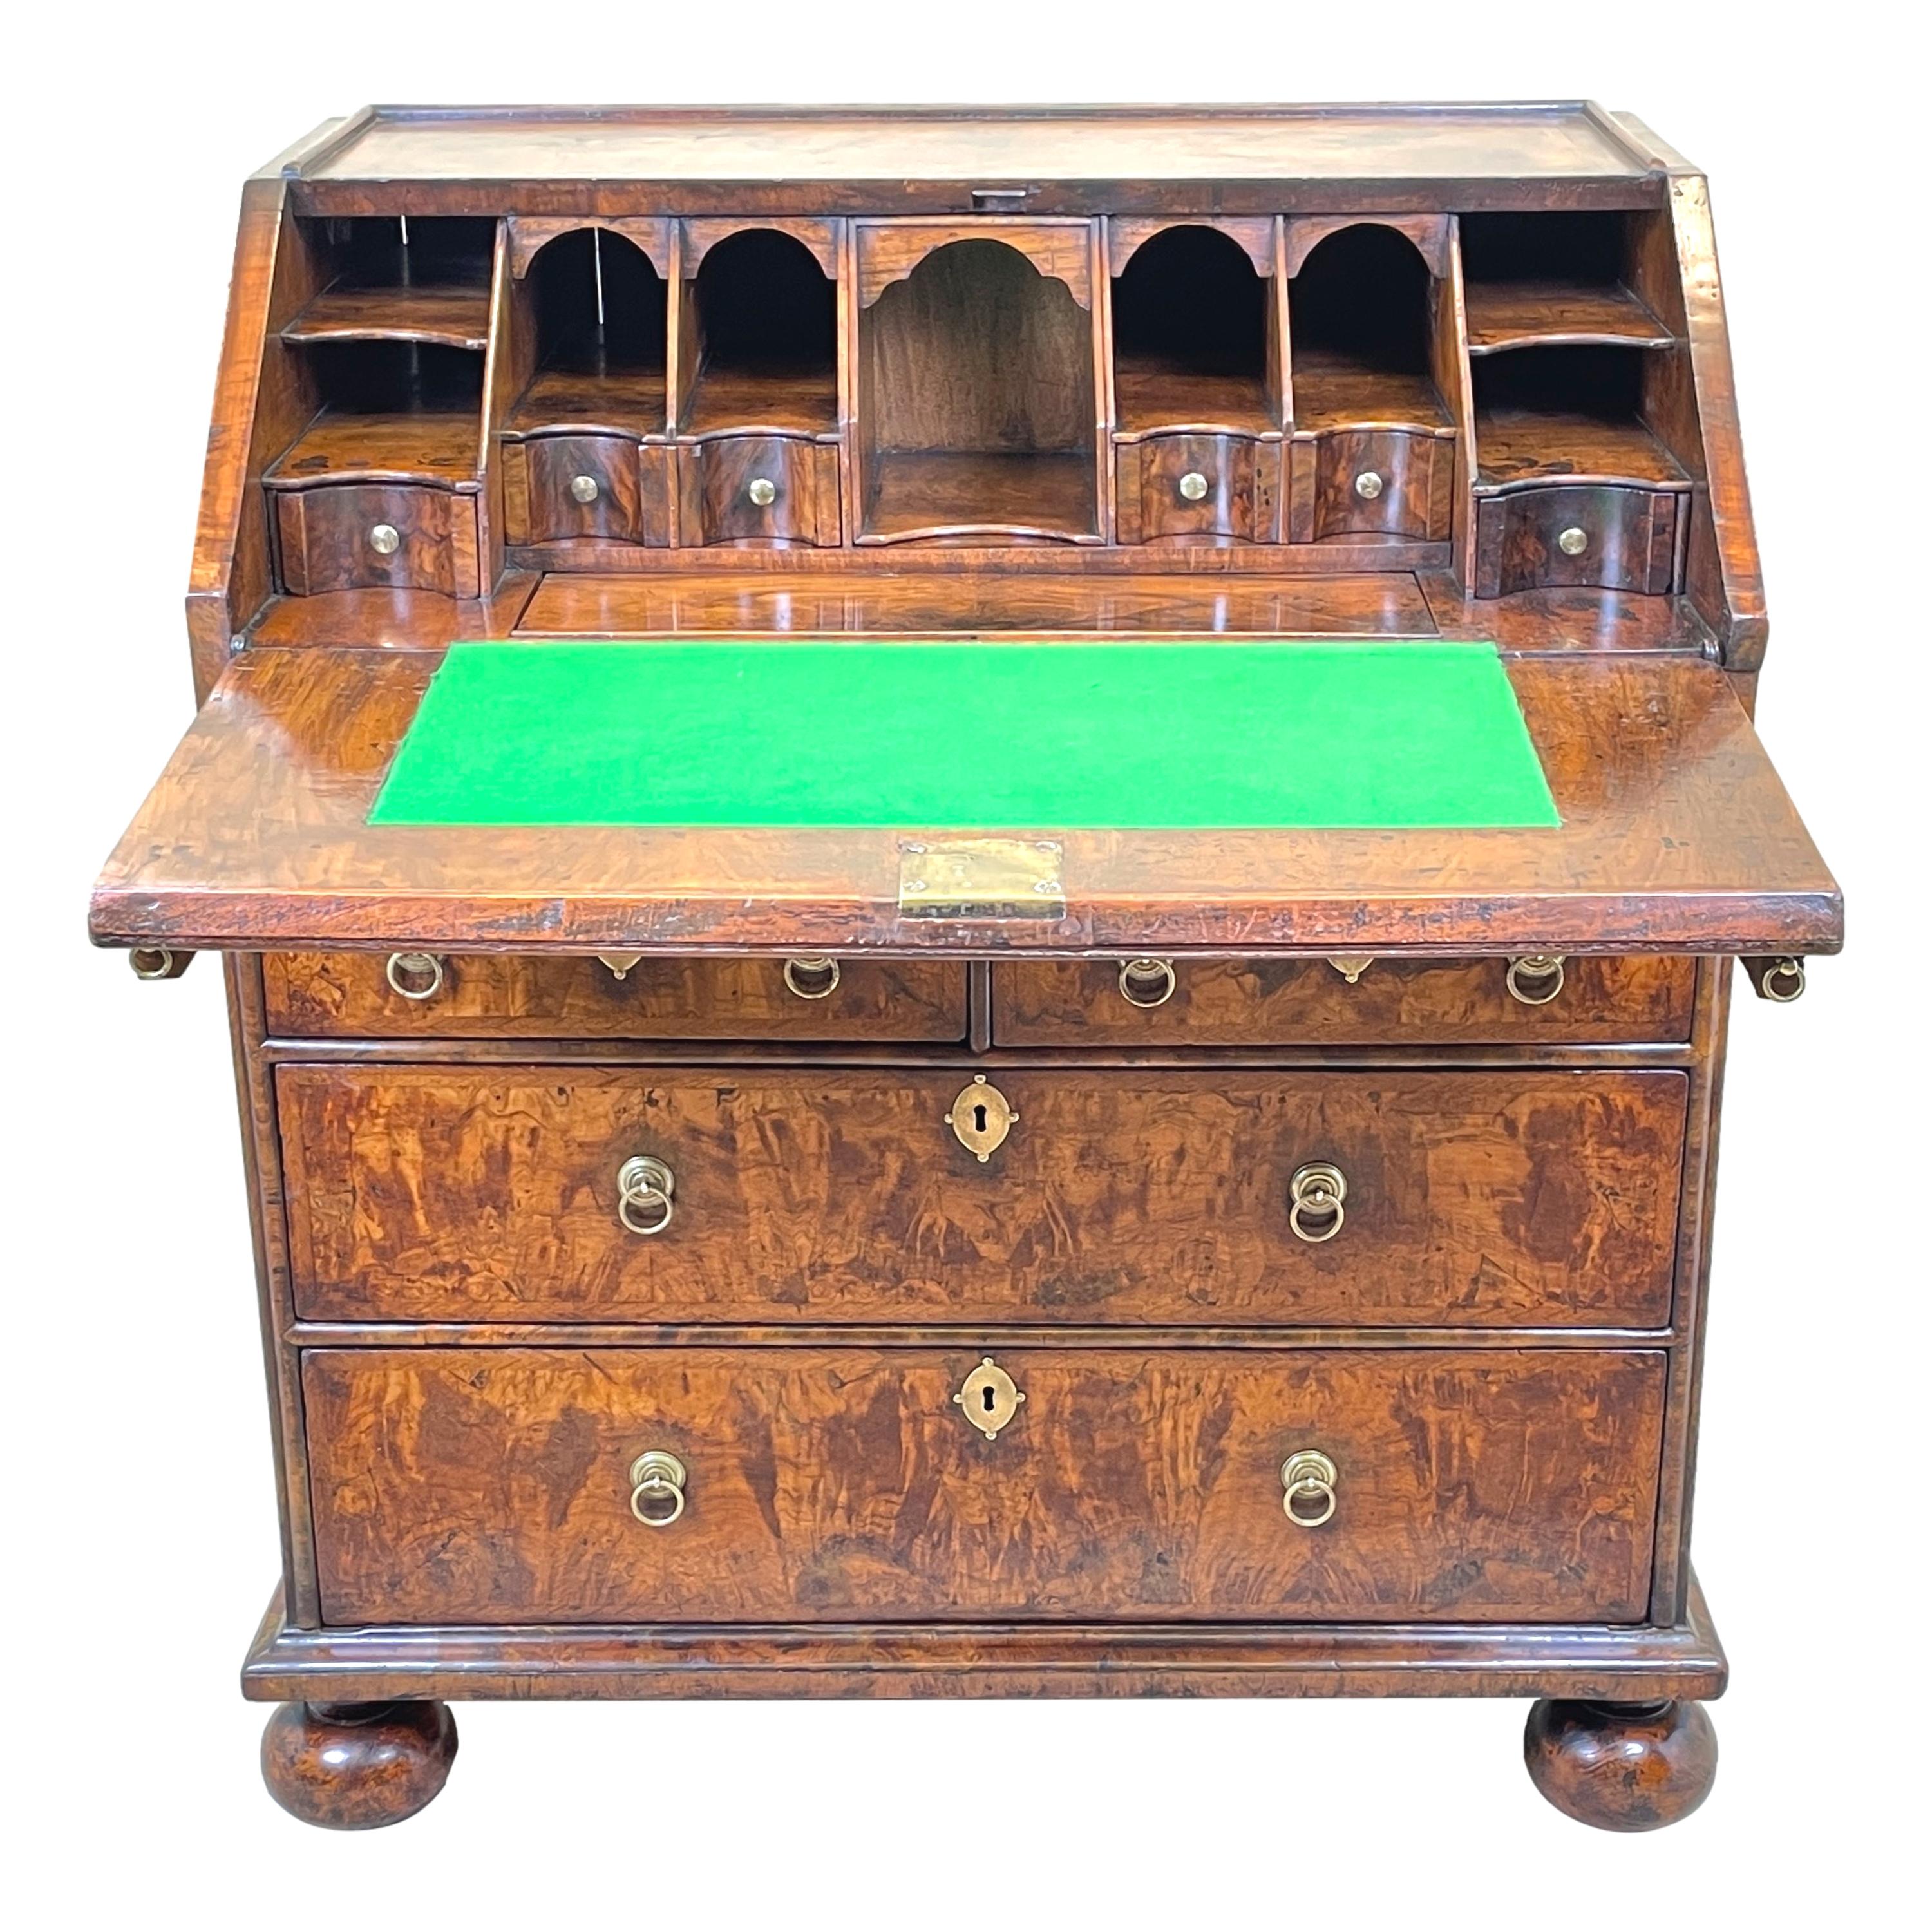 A simply stunning Queen Anne Period Burr walnut Bureau, of exceptional untouched rich colour and patina, with superbly figured veneers to shallow sloping fall, enclosing well fitted interior which includes drawers, Pigeon holes and well with sliding